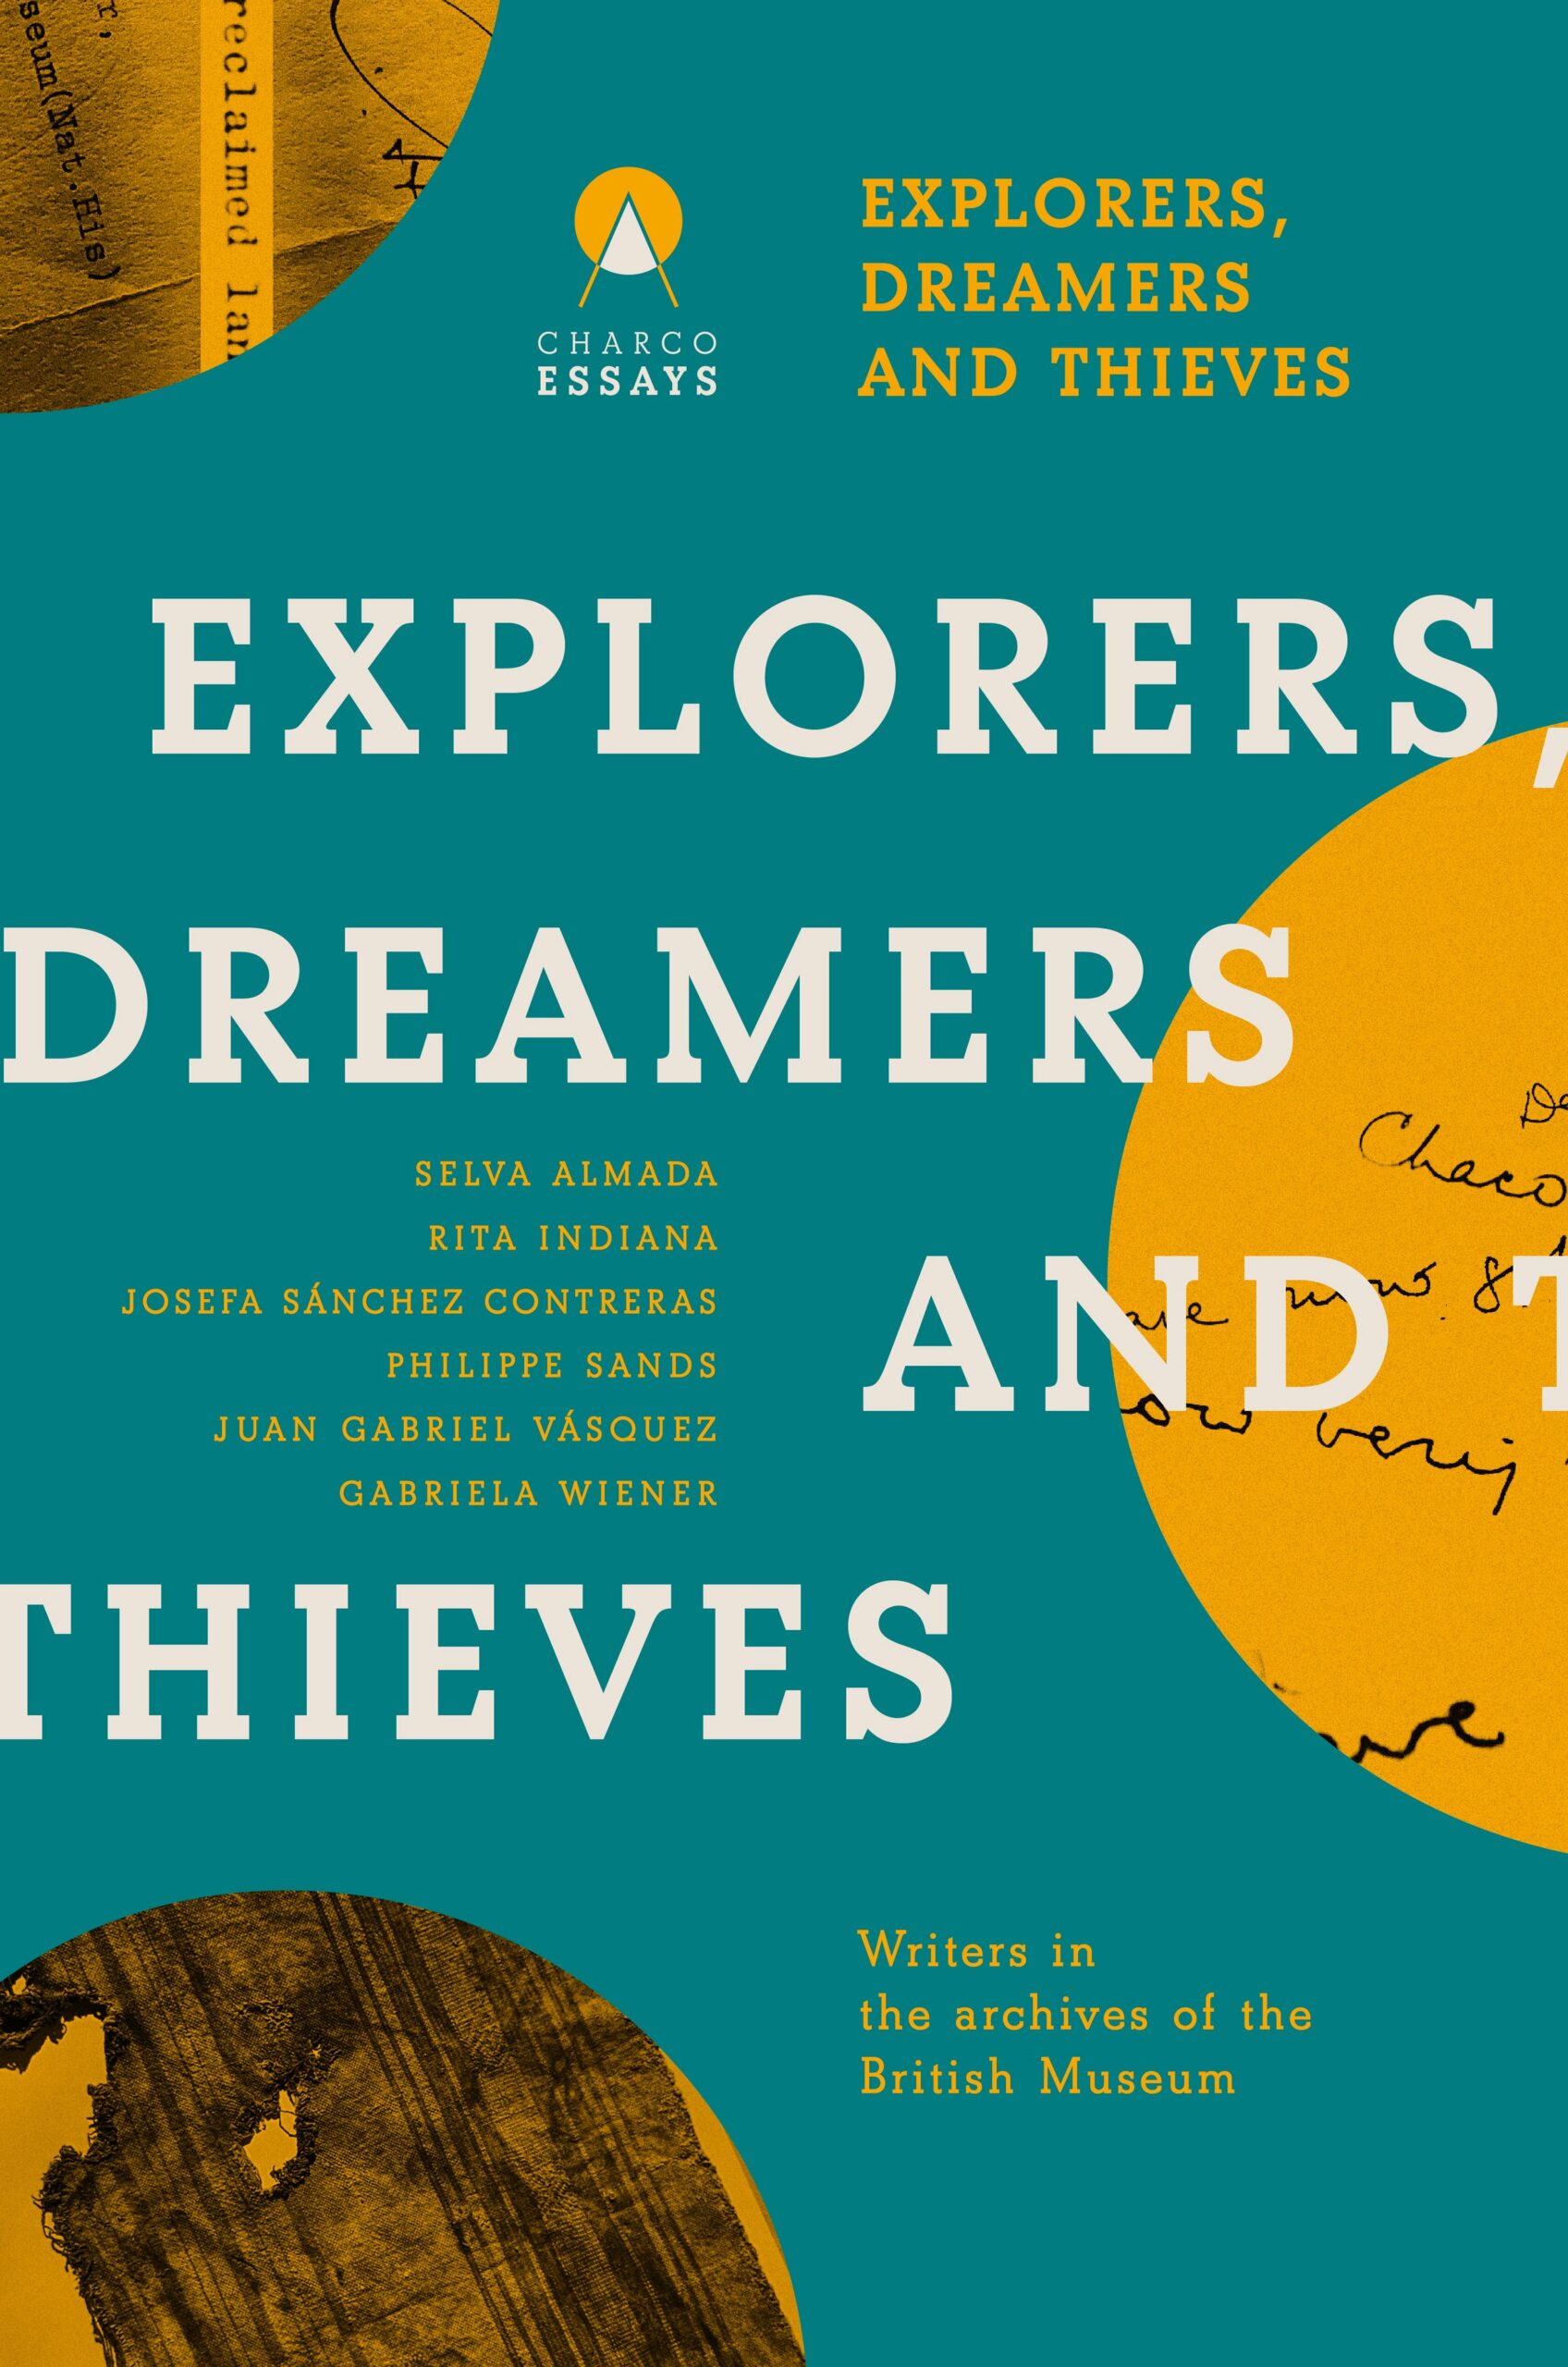 Explorers, Dreamers and Thieves, Charco Press